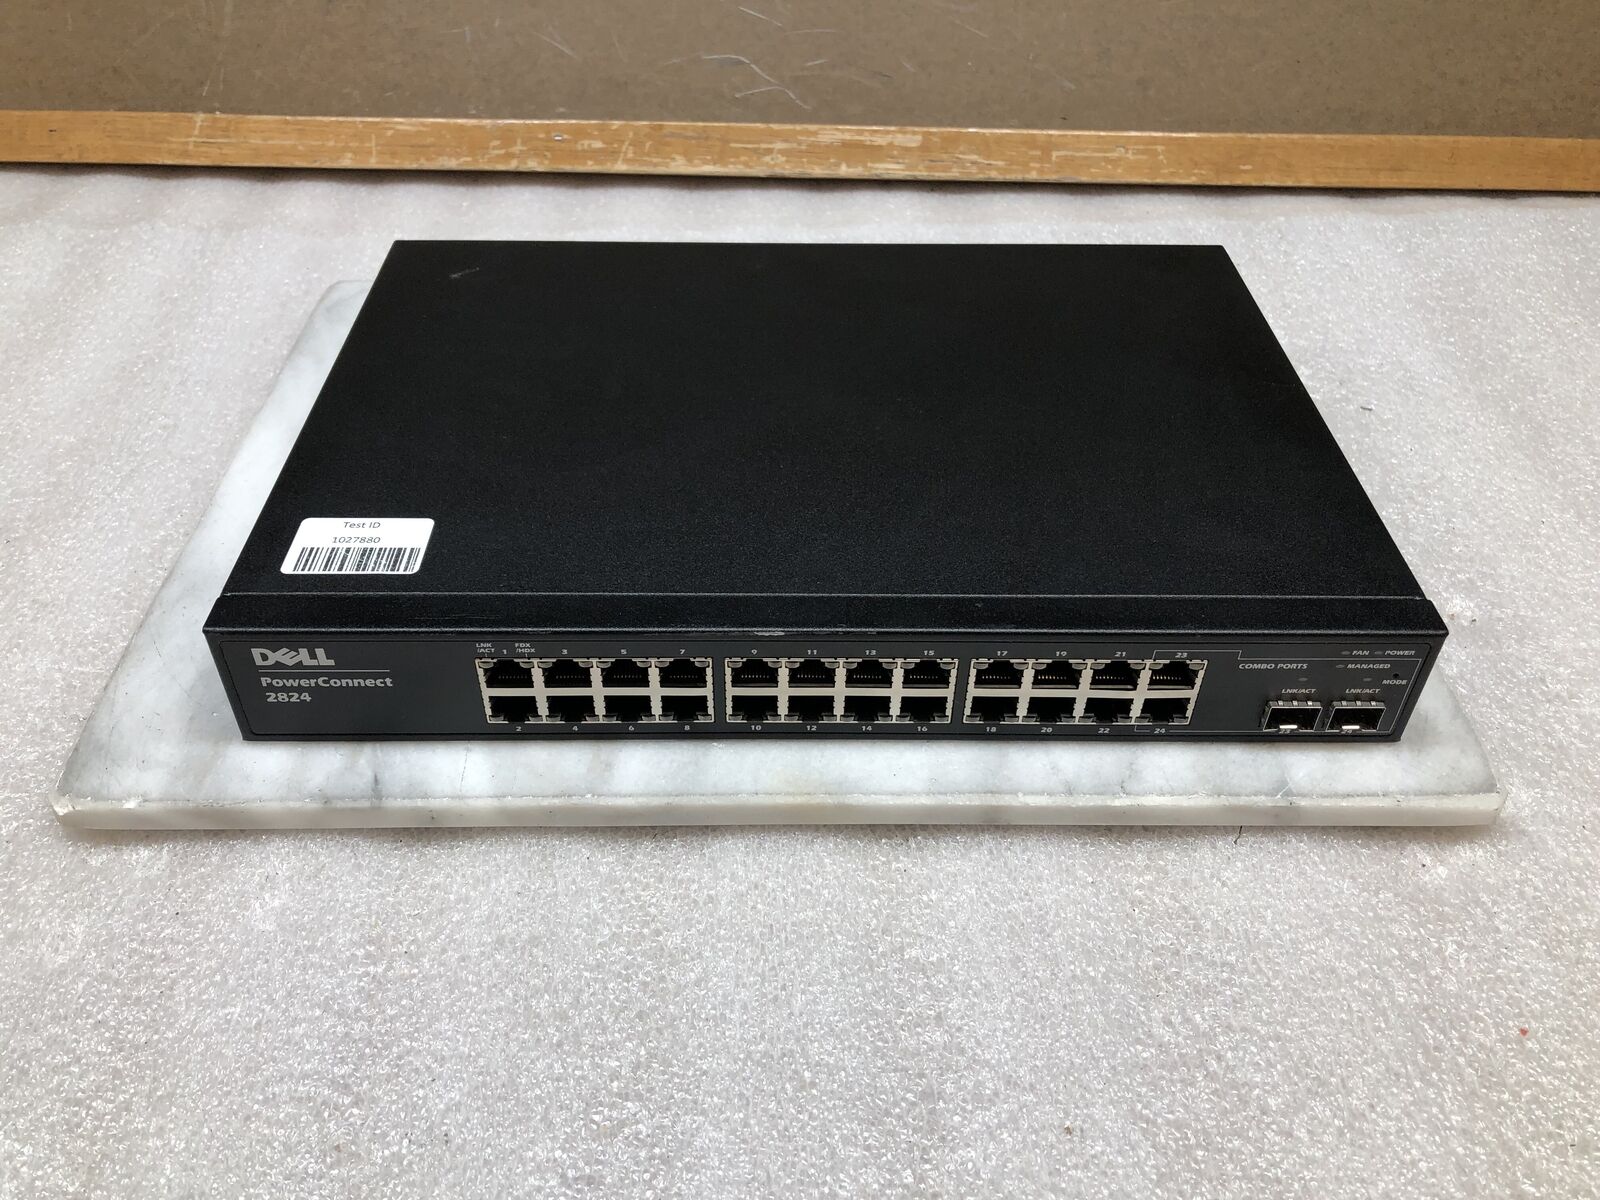 Dell PowerConnect 2824 24-Port Gigabyte Mountable Network Ethernet Switch